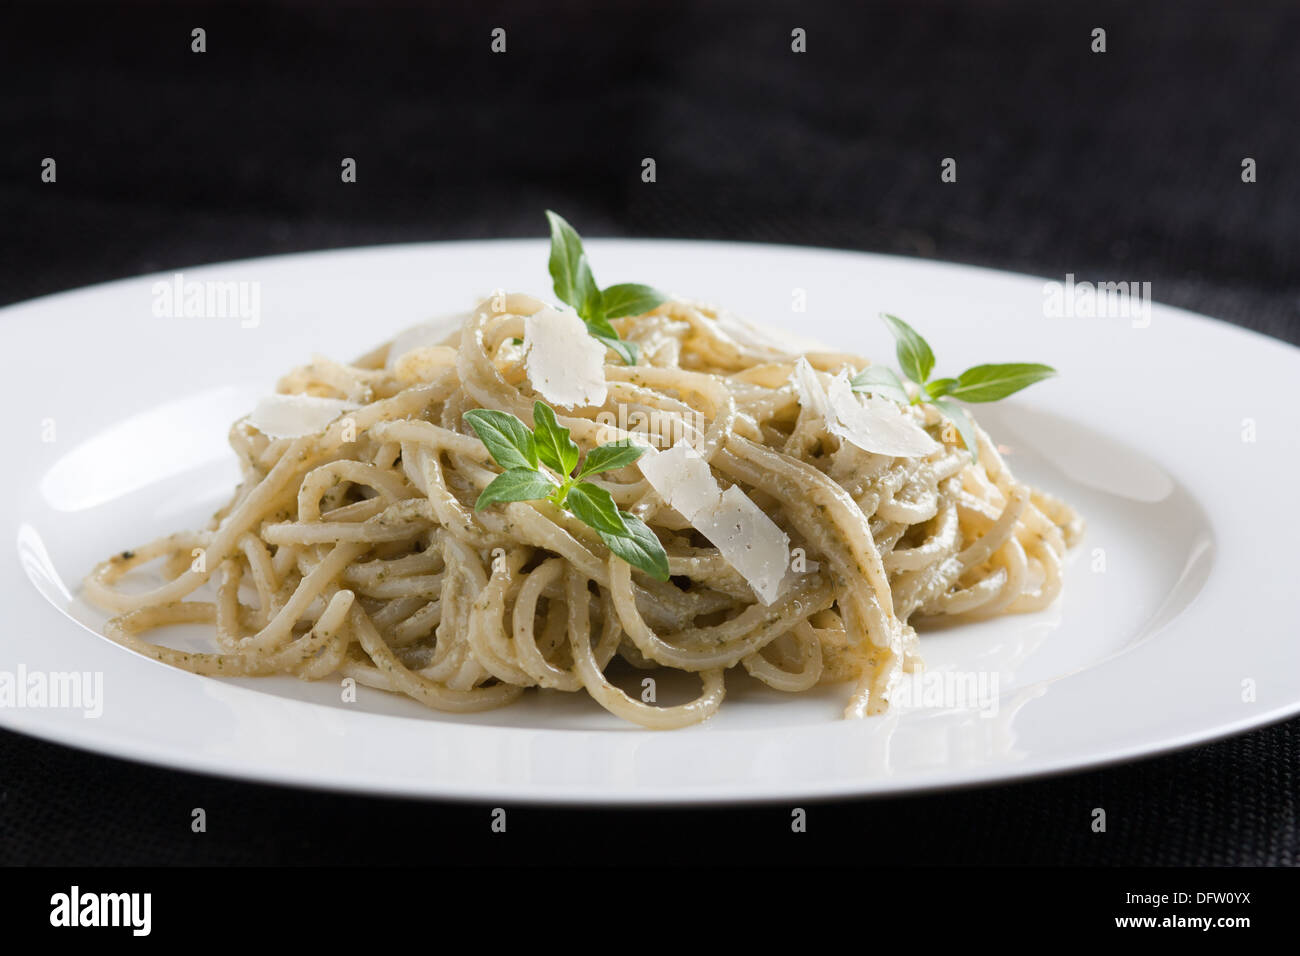 Spaghetti with cheese and basil Stock Photo